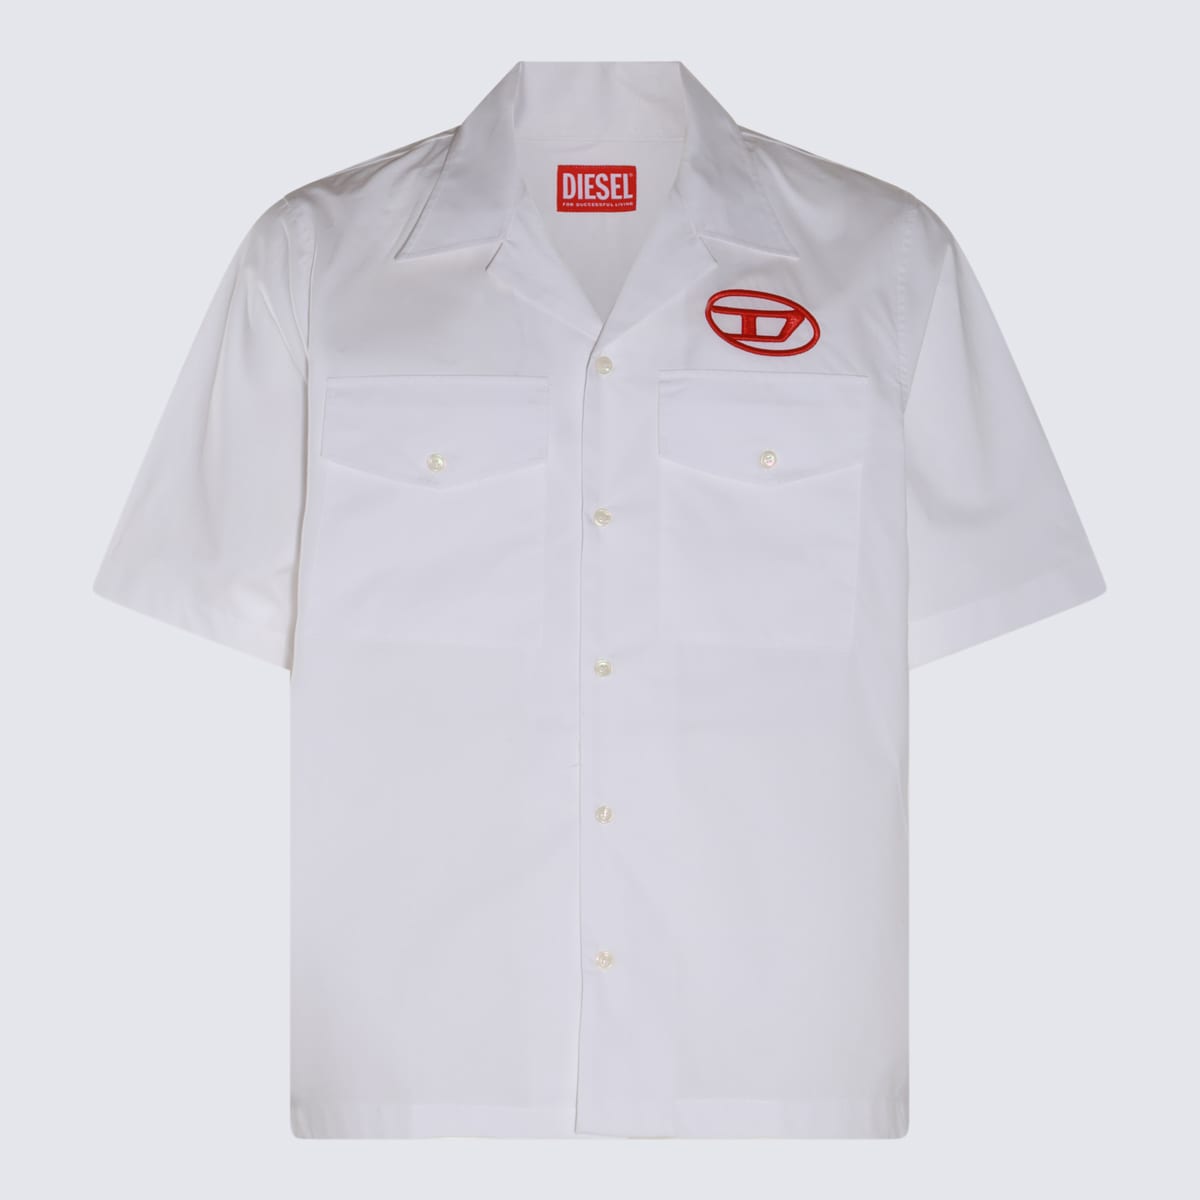 Diesel White And Red Cotton Shirt